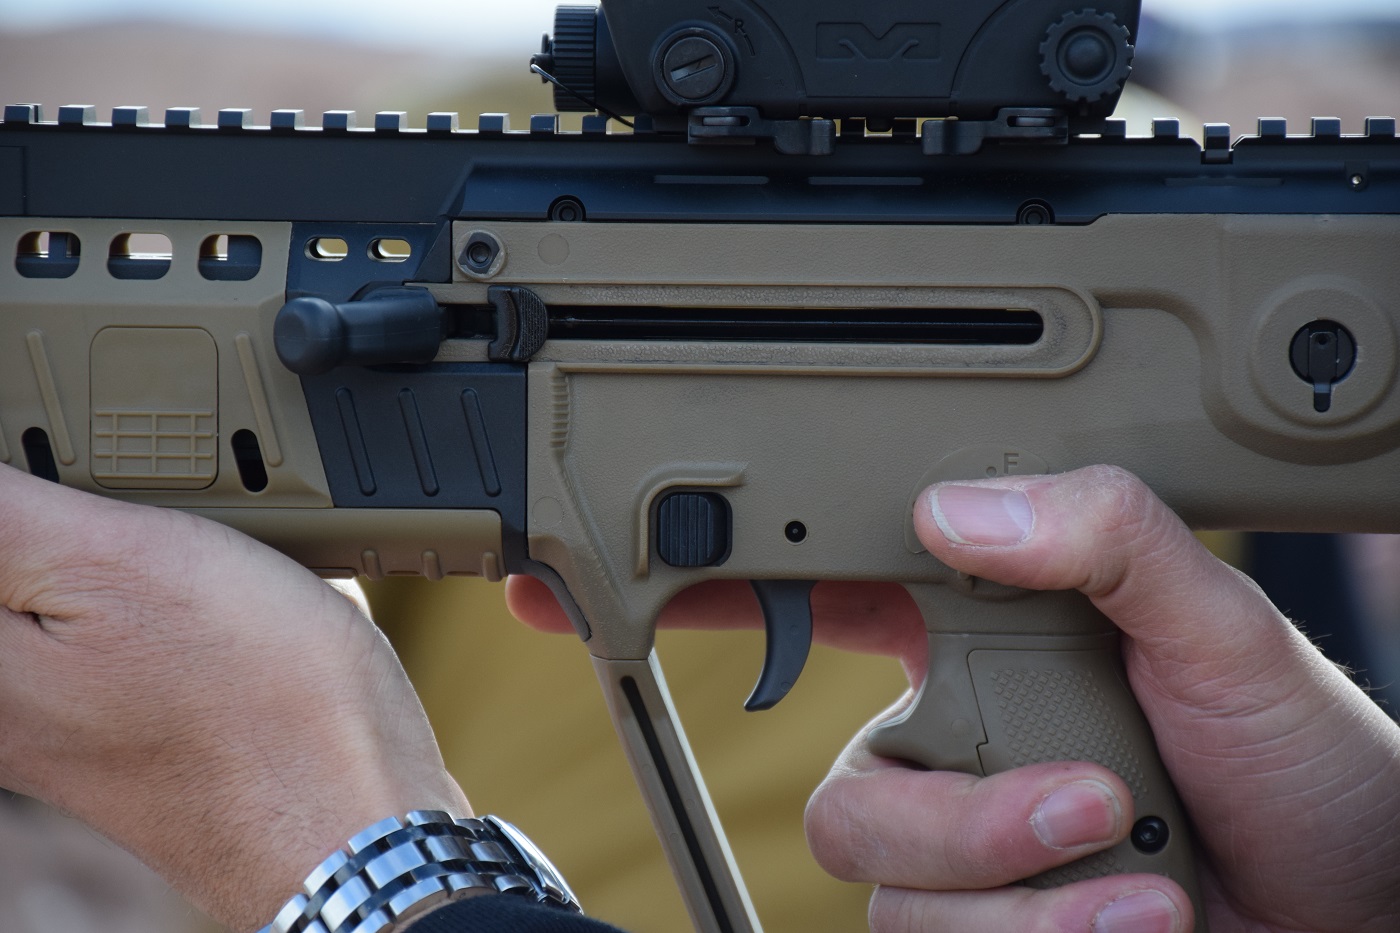 The X95 features an ambidextrous, AR-style magazine release ahead and above...